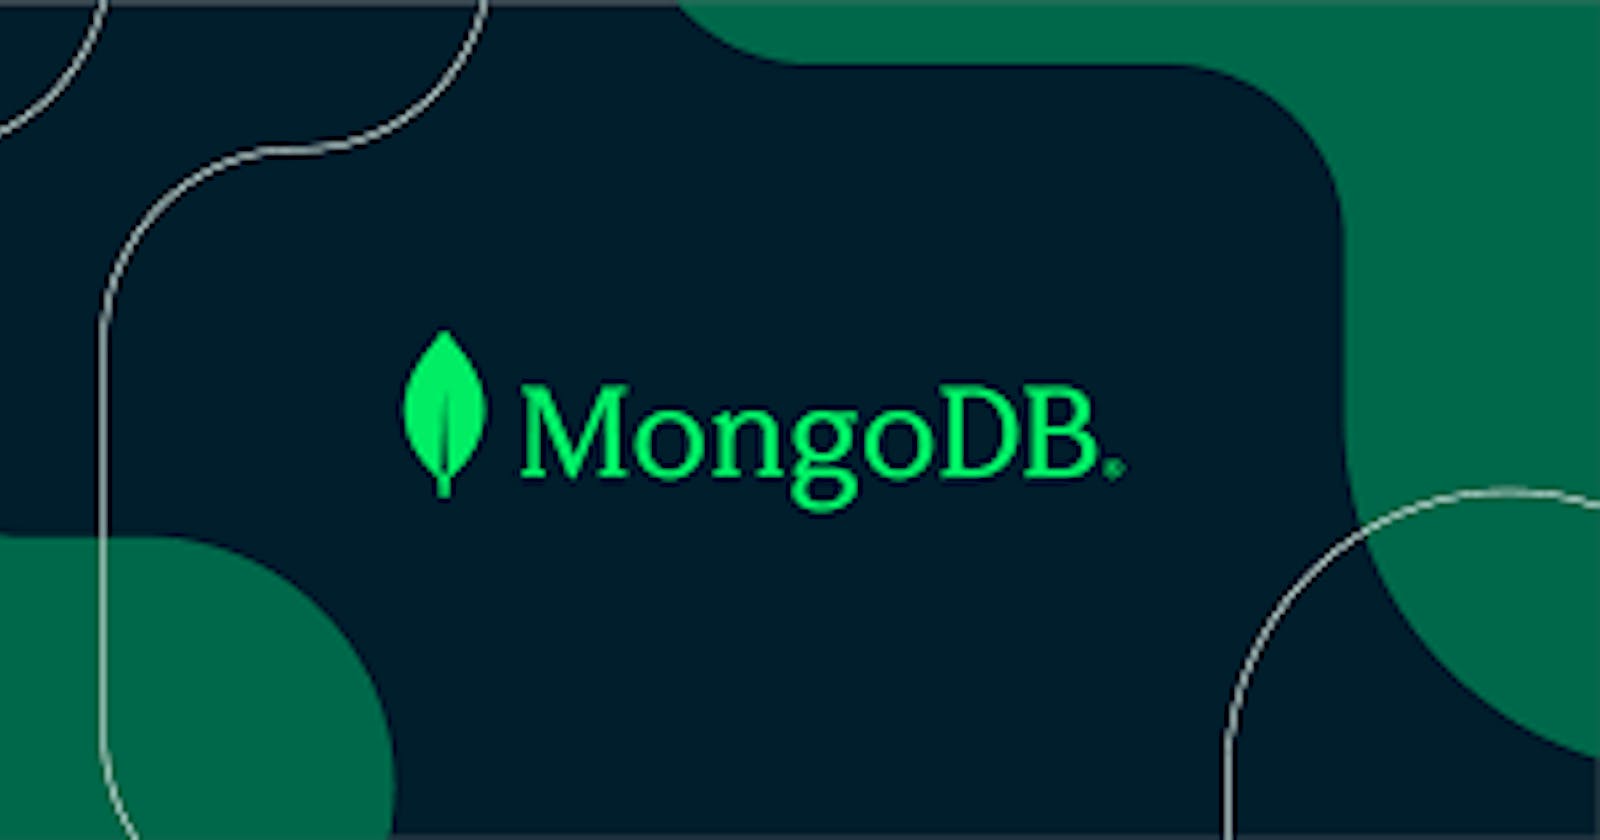 How to connect Mongodb Atlas with Node js and Express server